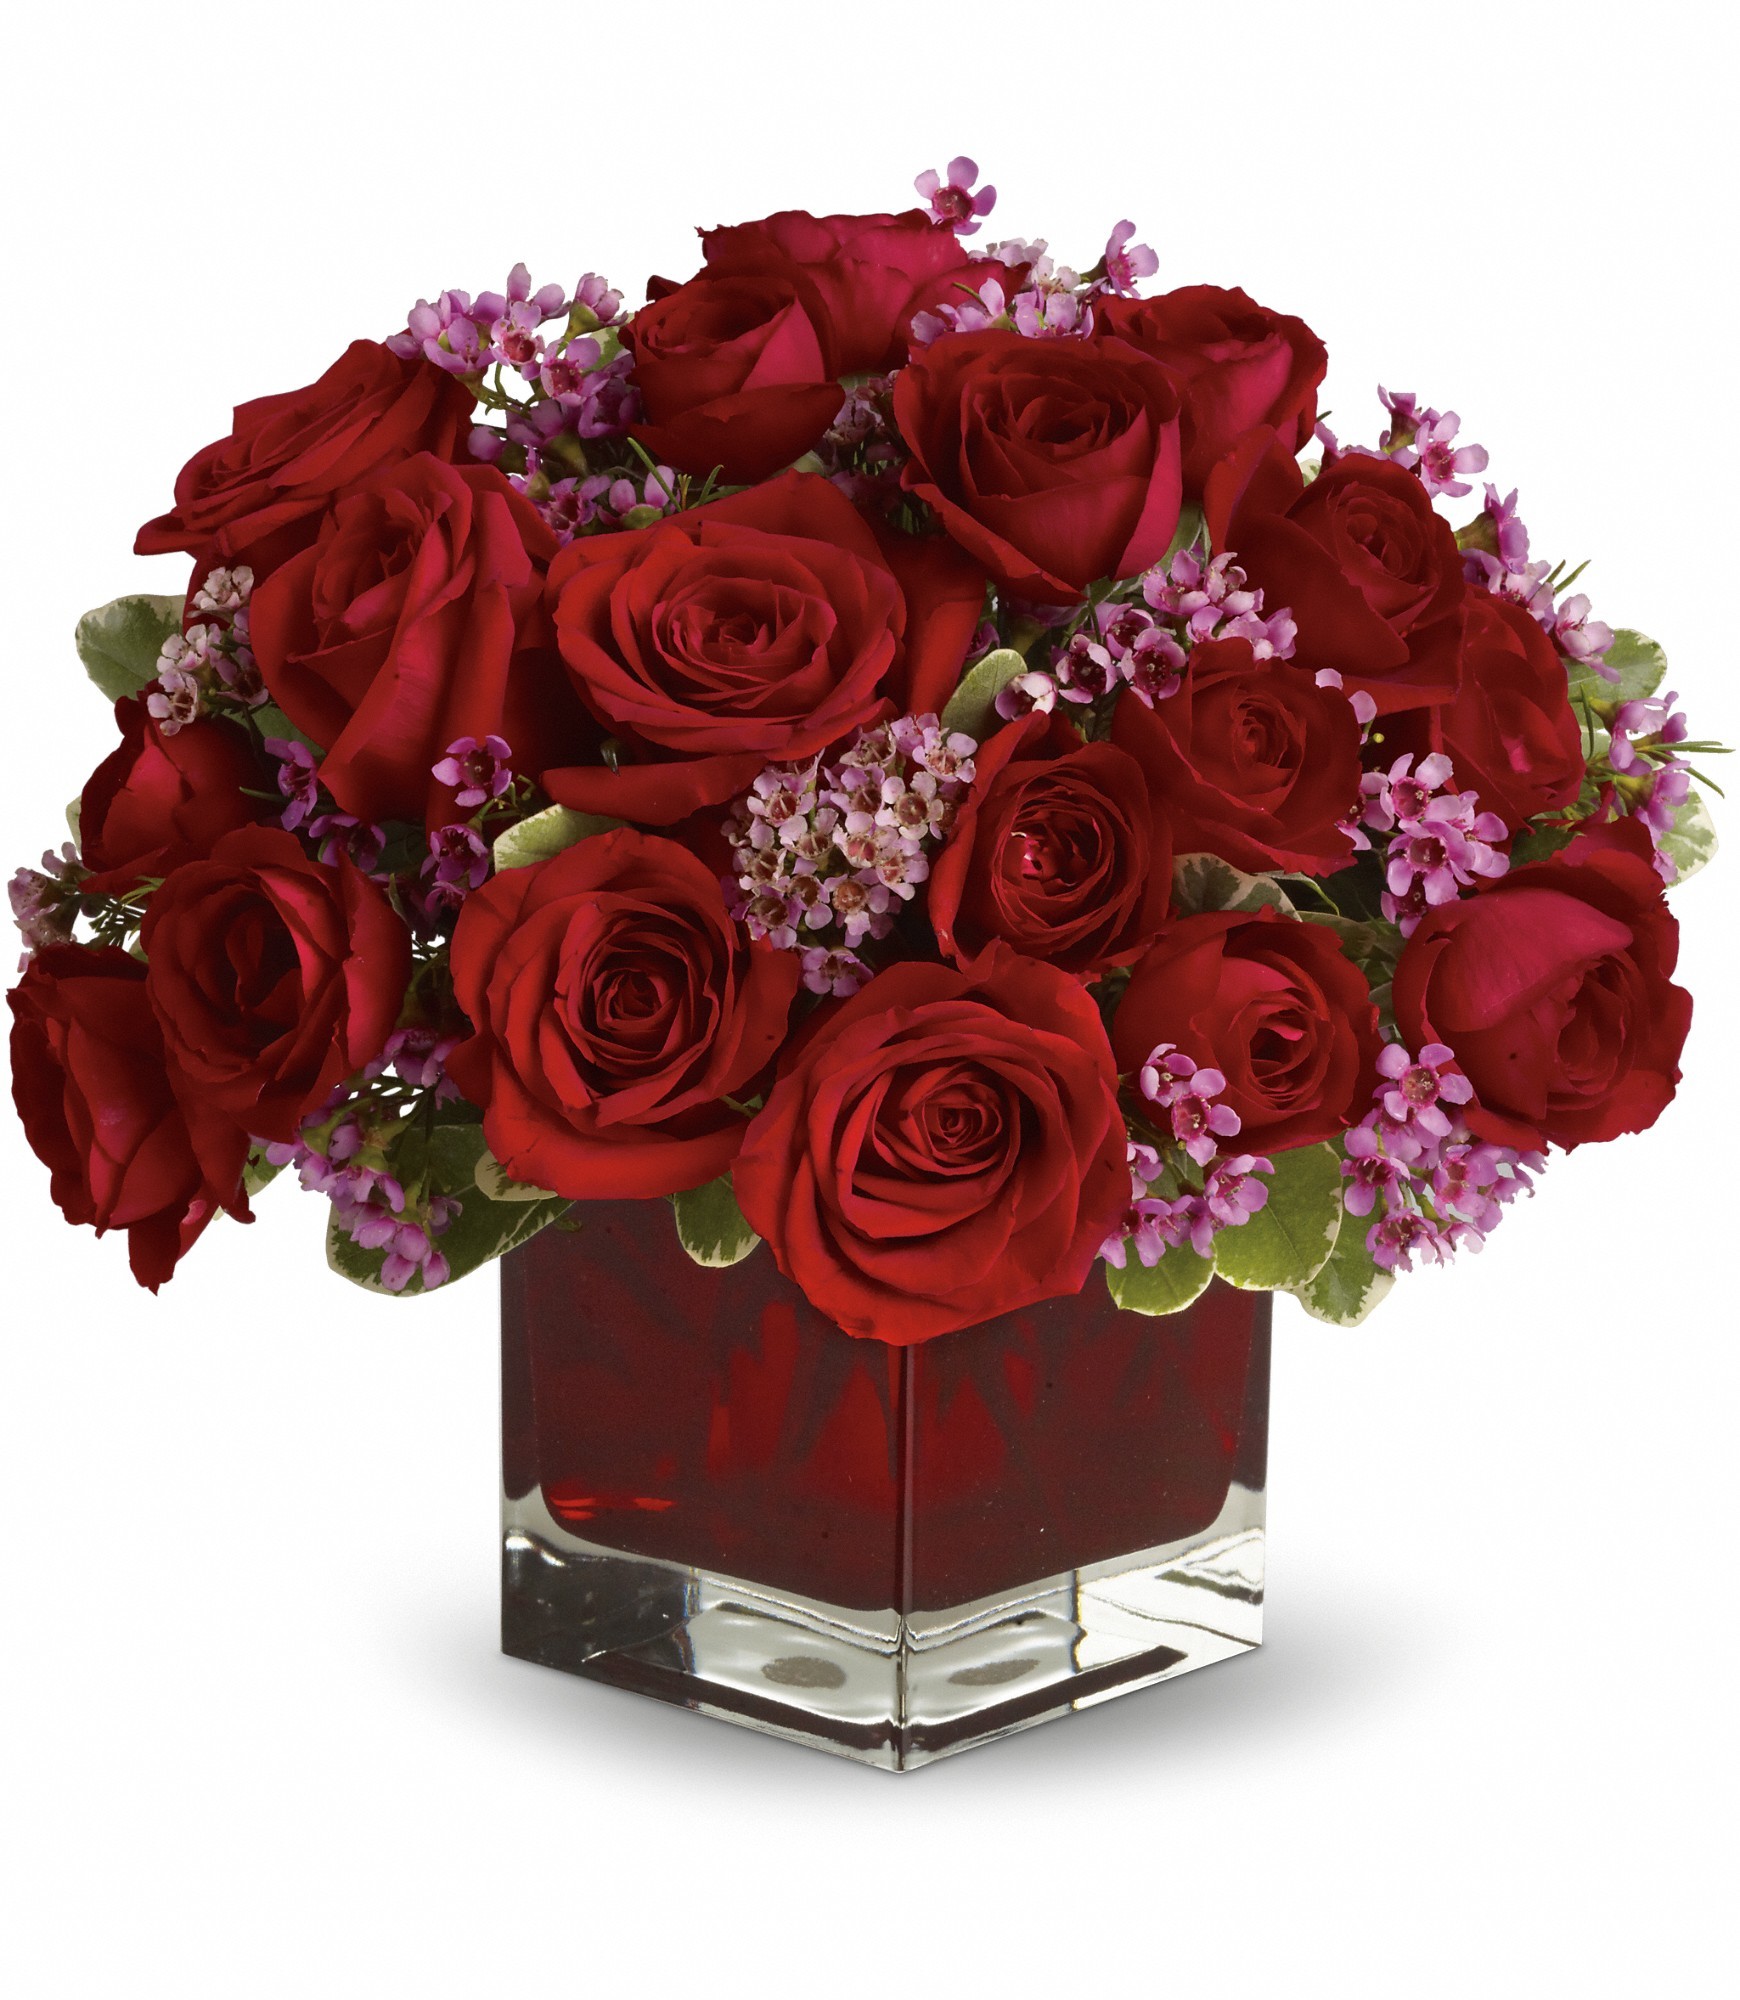 Never Let Go by Teleflora - 18 Red Roses in Mound, MN | Lake ...